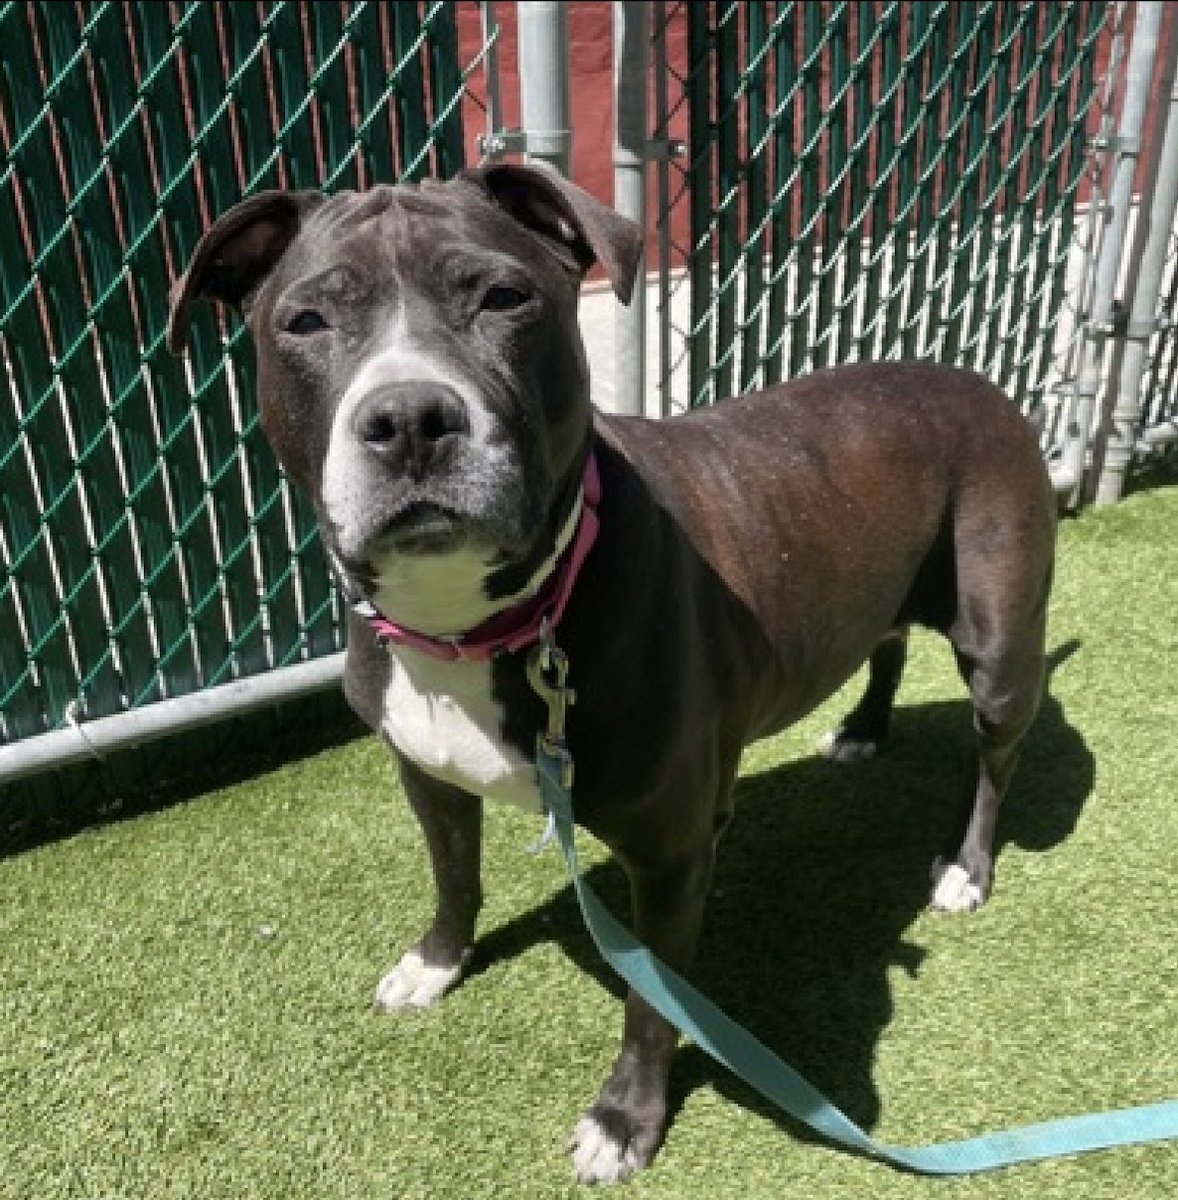 💞Spottie💞 #NYCACC #NYC #194334 9y #SaveOurSeniors #AdoptMe #RescueMe Precious sweet Sr, a total gem! V special lady, deserves everything gd. Show her u care, her ❤️'s yrs. Here 2 long, needs loving 4ever #Adopter, 4 snuggles on her own couch, gentle walks Pls #pledge 💞Spott